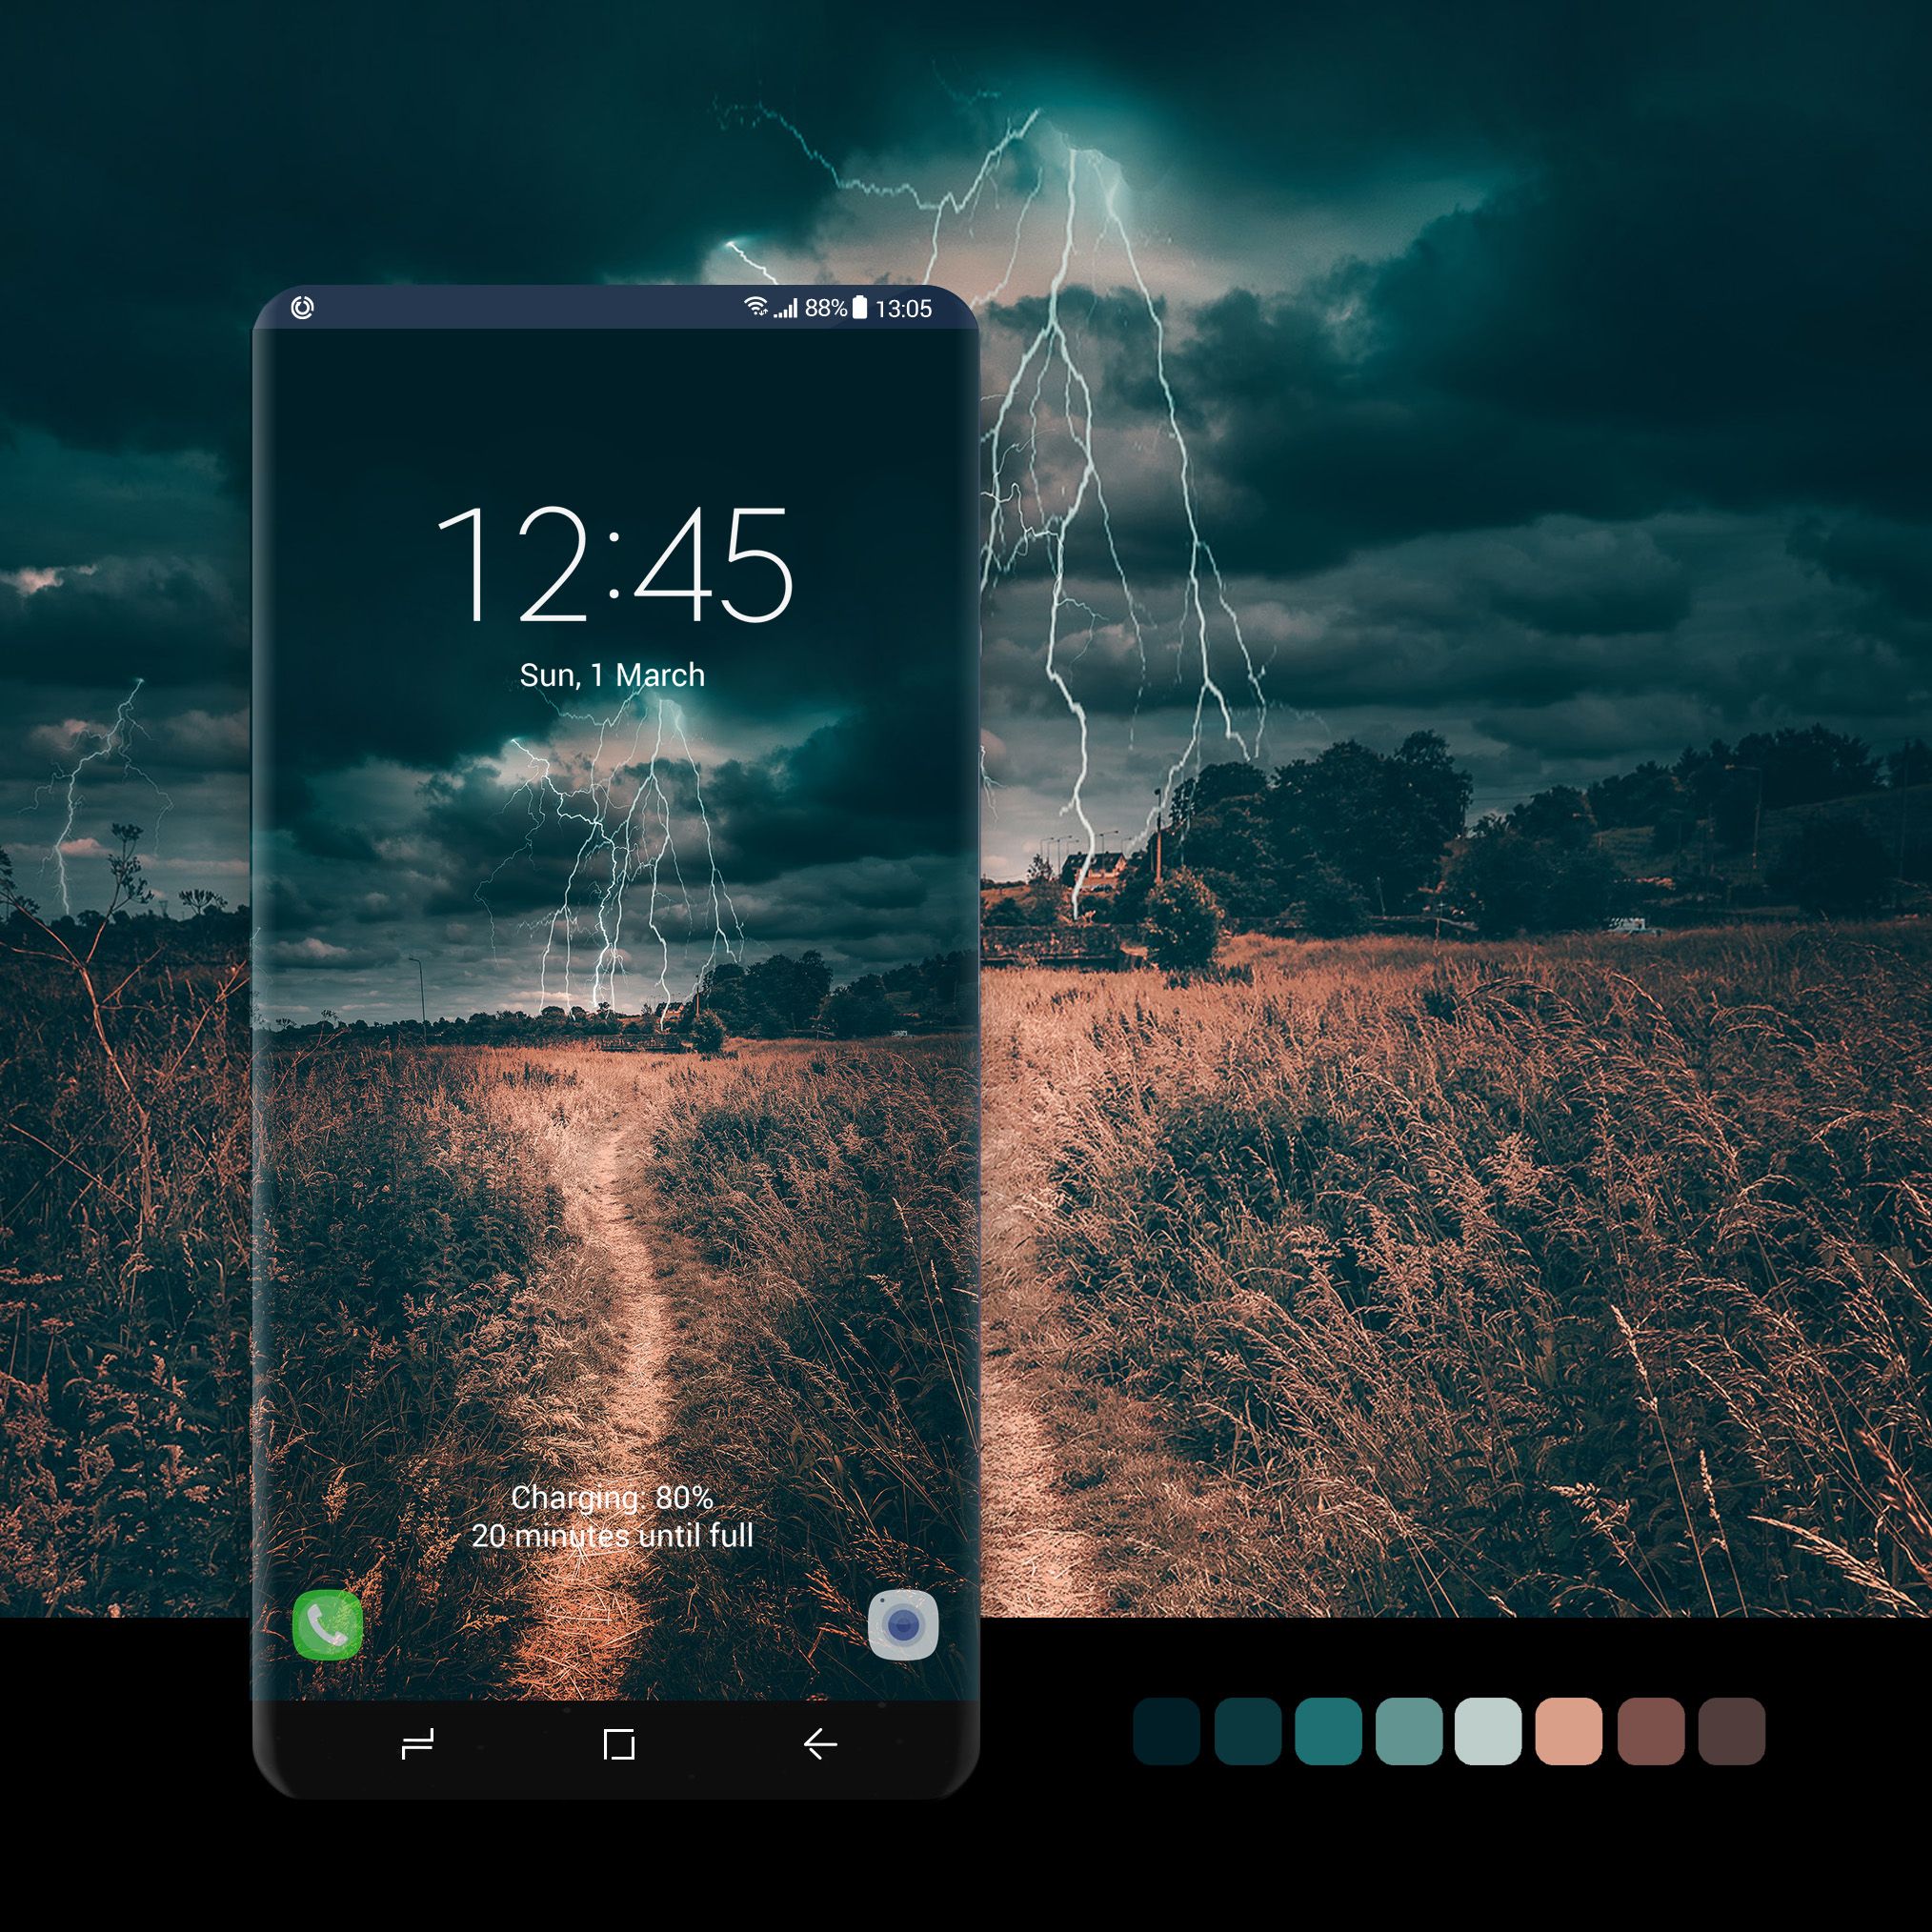 Thunderstorm In A Meadow Wallpaper Android Phone